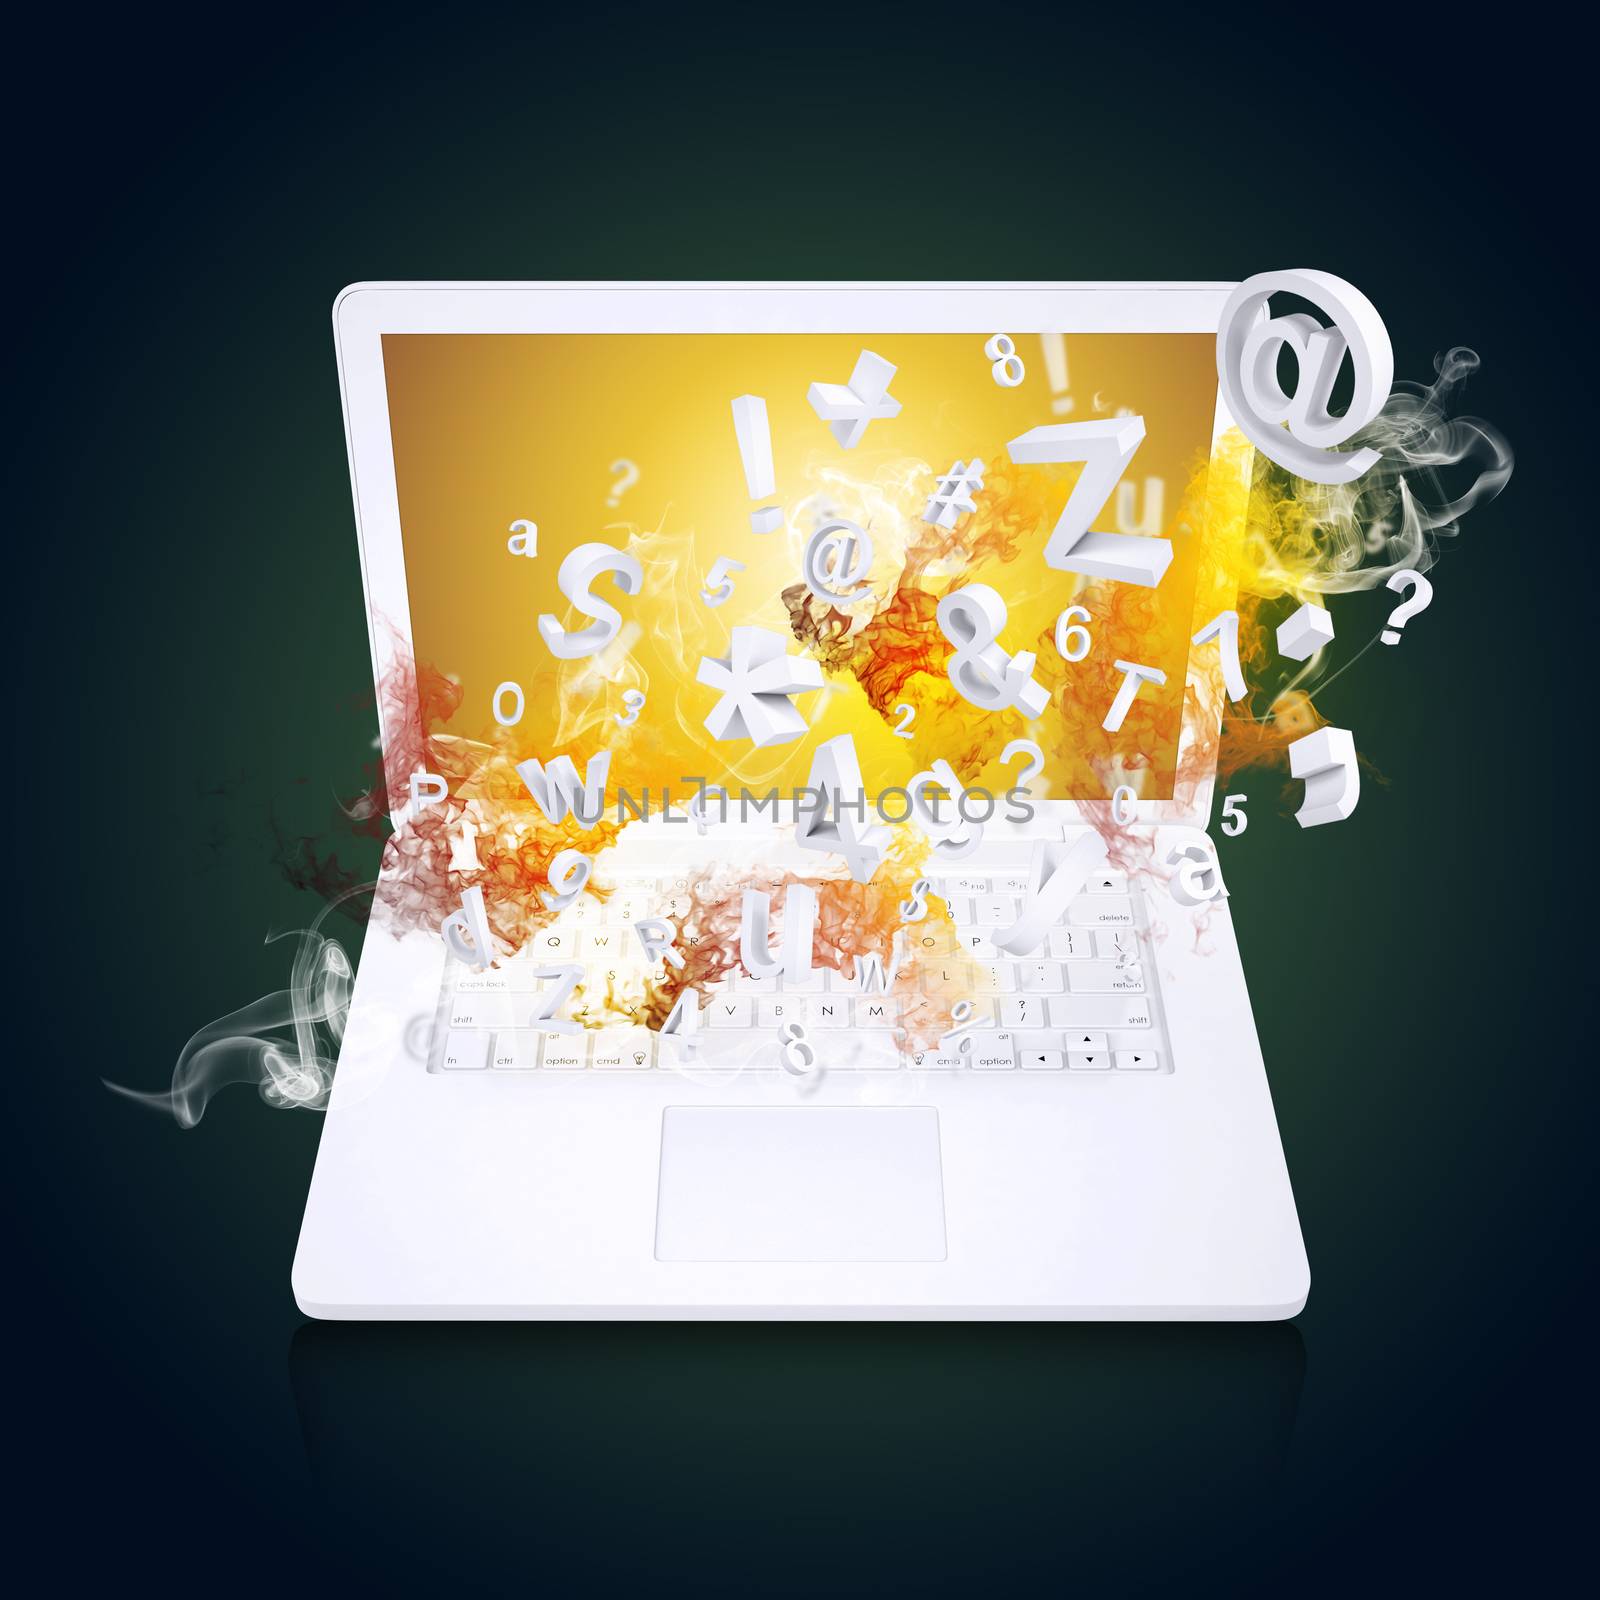 Laptop emits letters, numbers and smoke by cherezoff